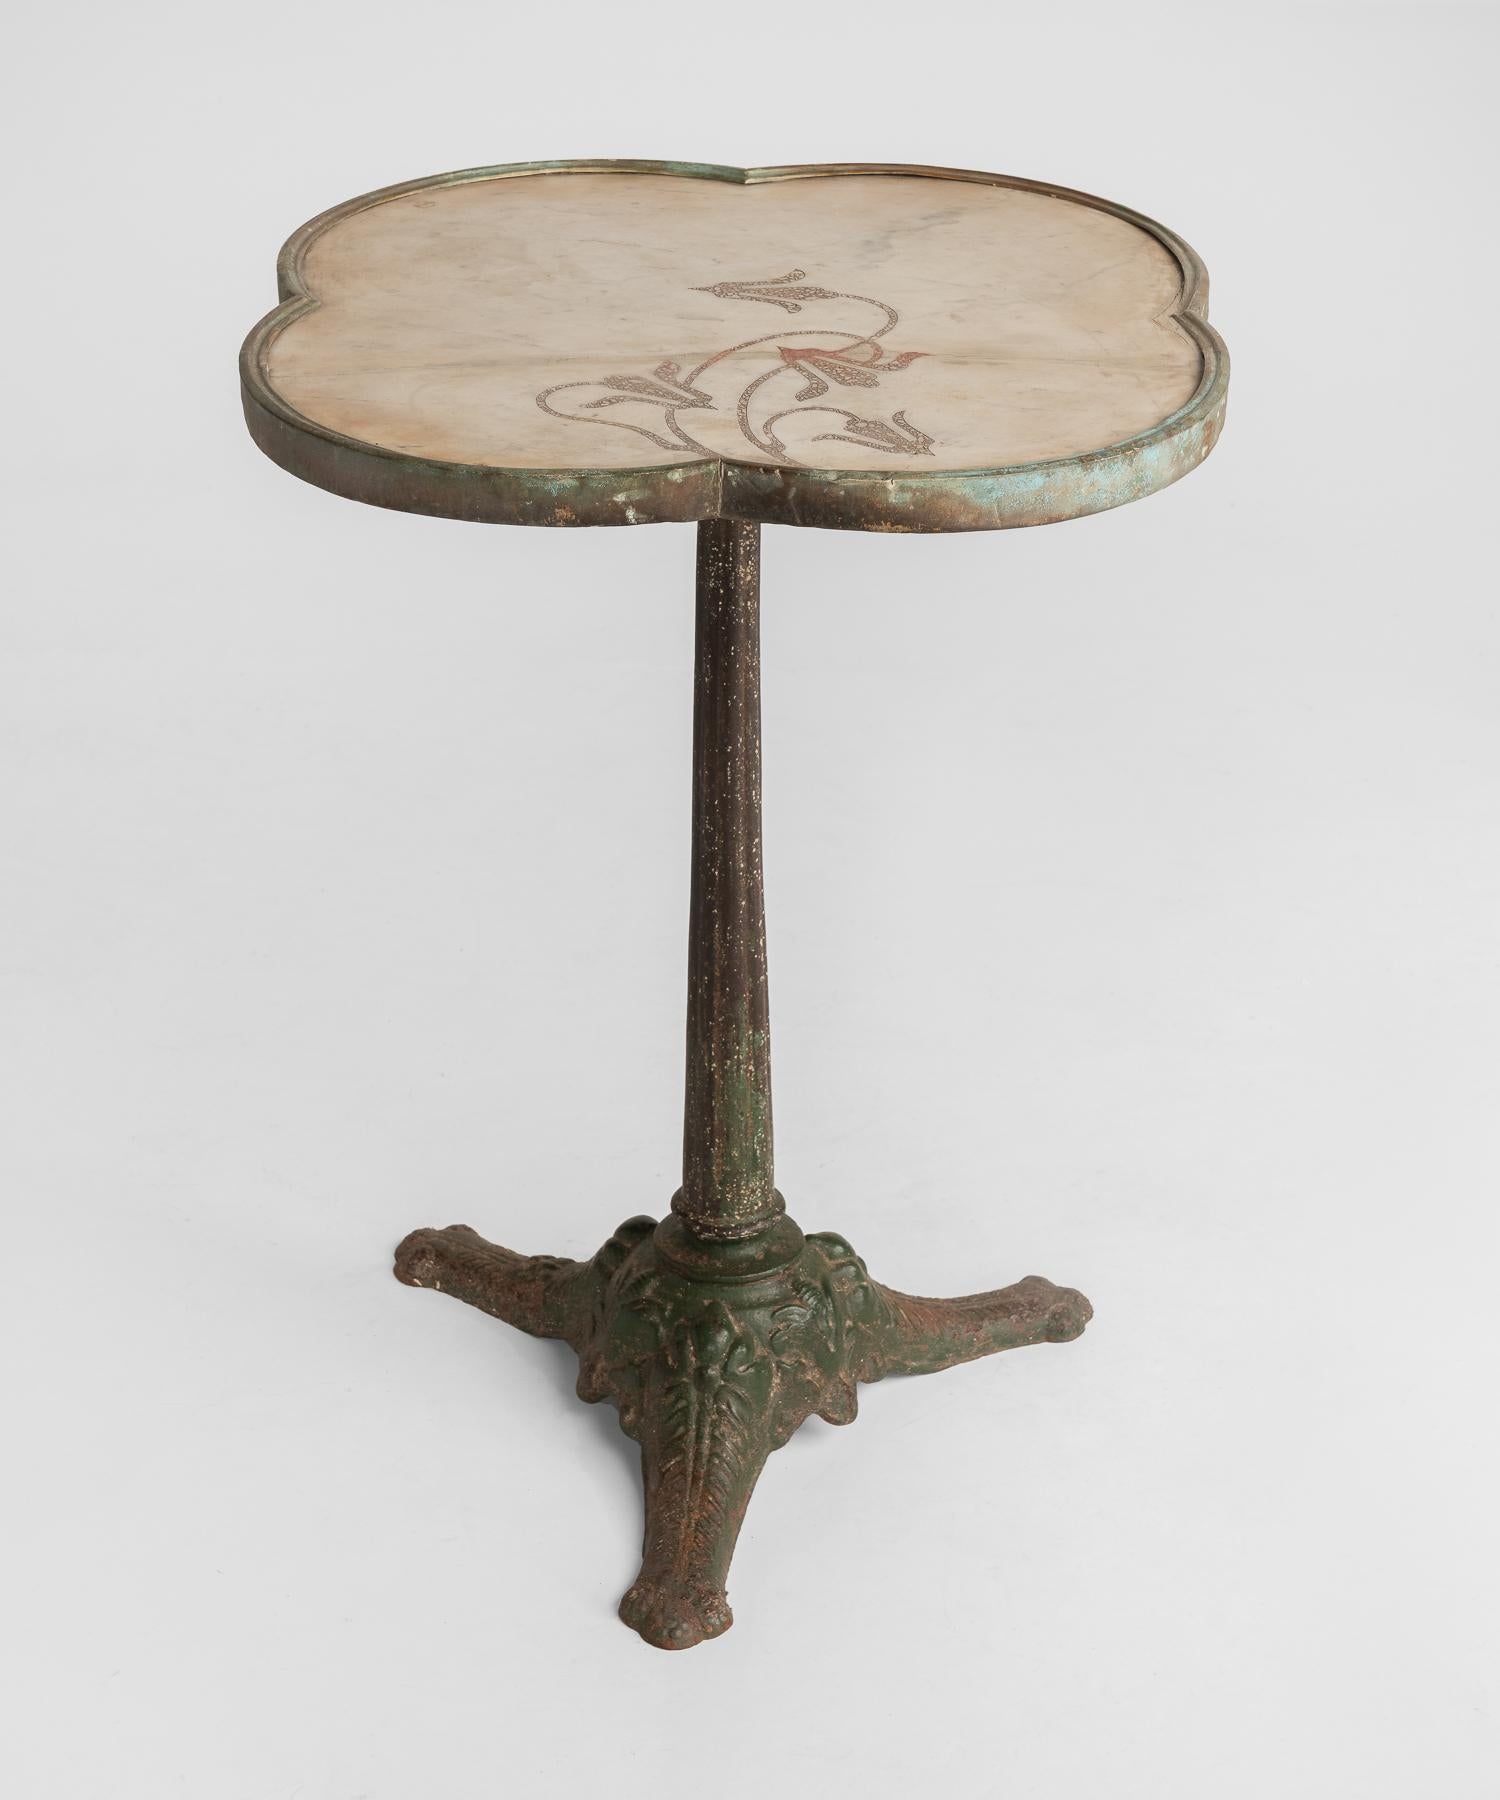 Art Nouveau garden table, circa 1900

Quatrefoil table with inlaid marble-top and brass surround.